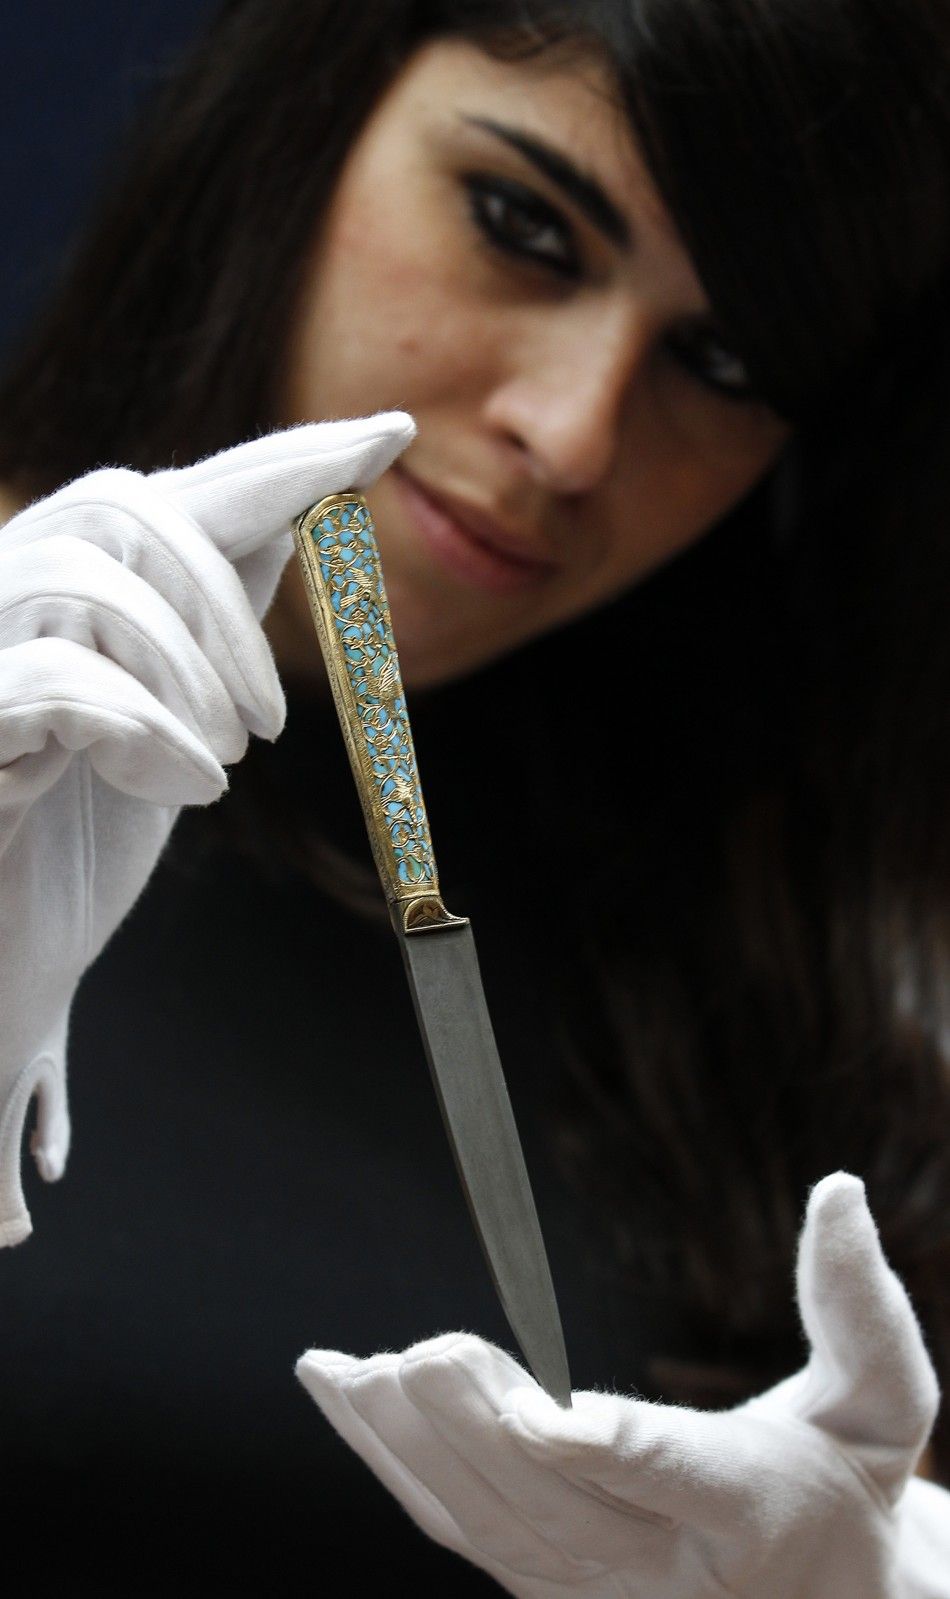 A gold and turquoise-hilted knife valued at 400,000-600,000 650,000-970,000